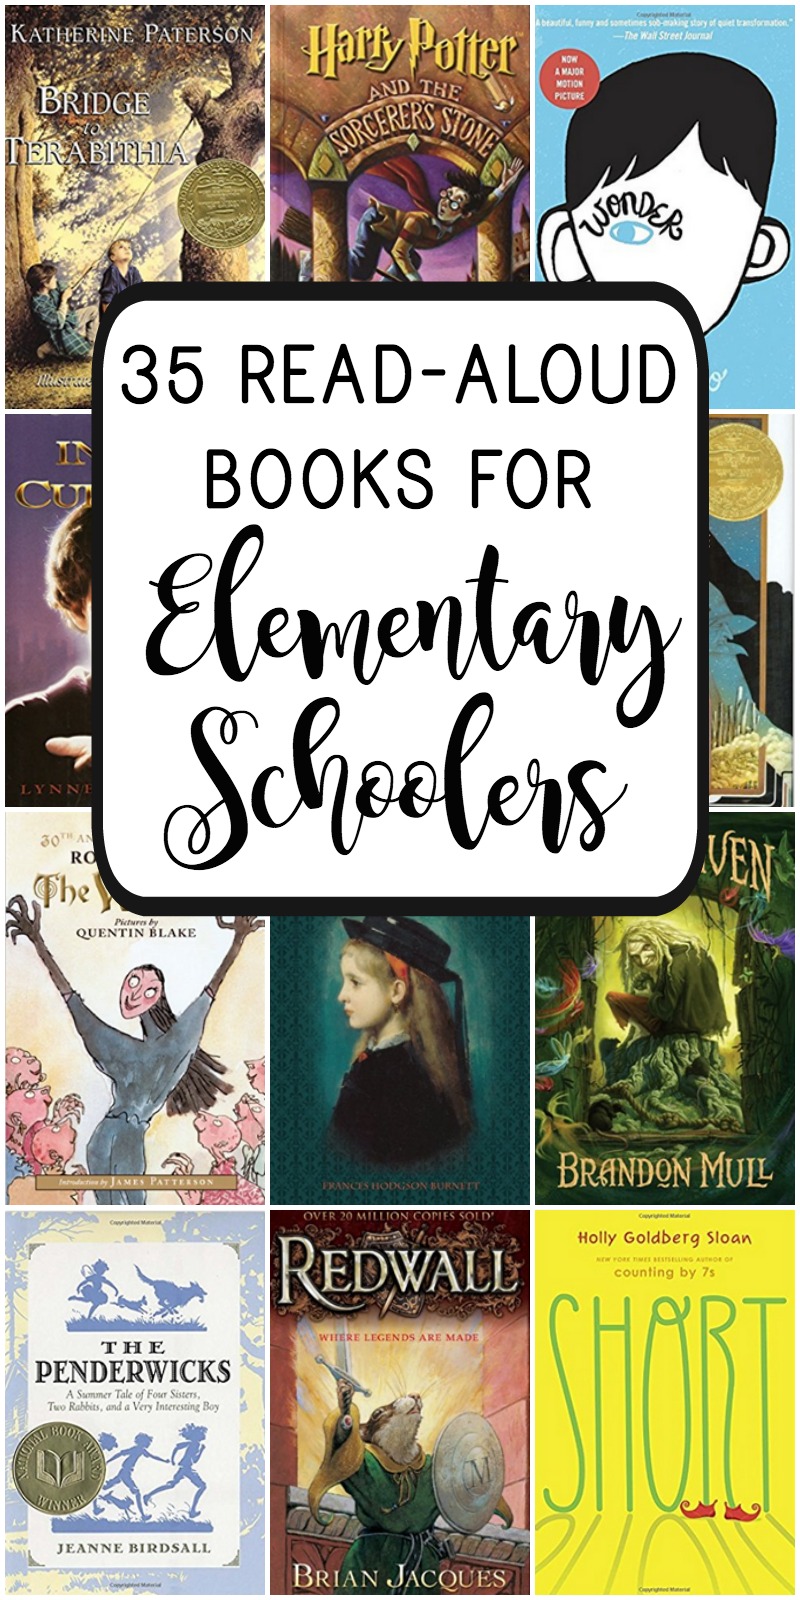 Wondering what the best read aloud books for elementary schoolers are? This list of 35 read aloud stories will keep your family or classroom riveted!